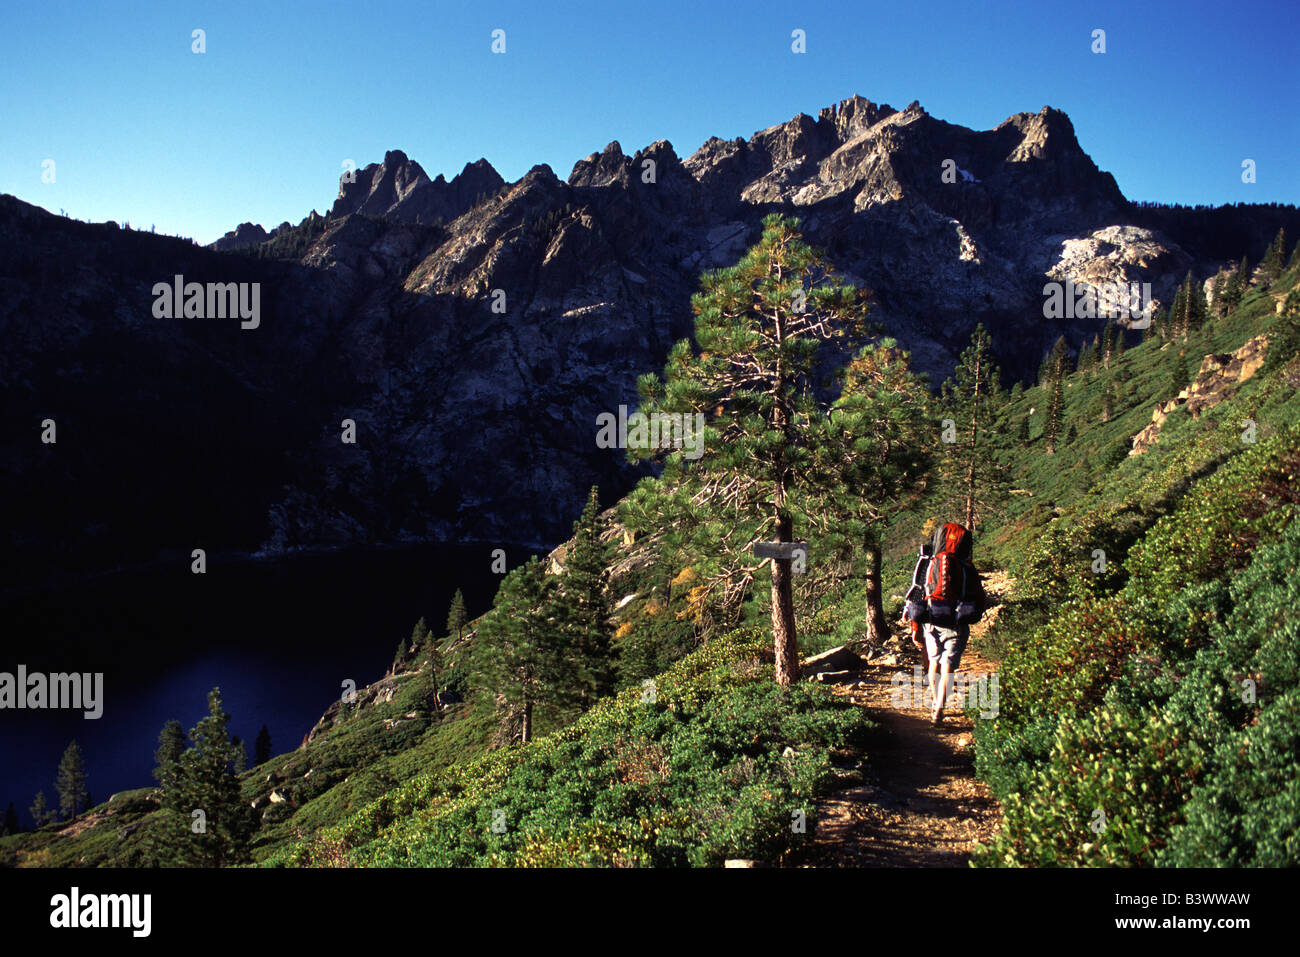 Rear view of a man hiking on mountains, Sierra Buttes, Sierra County, California, USA Stock Photo